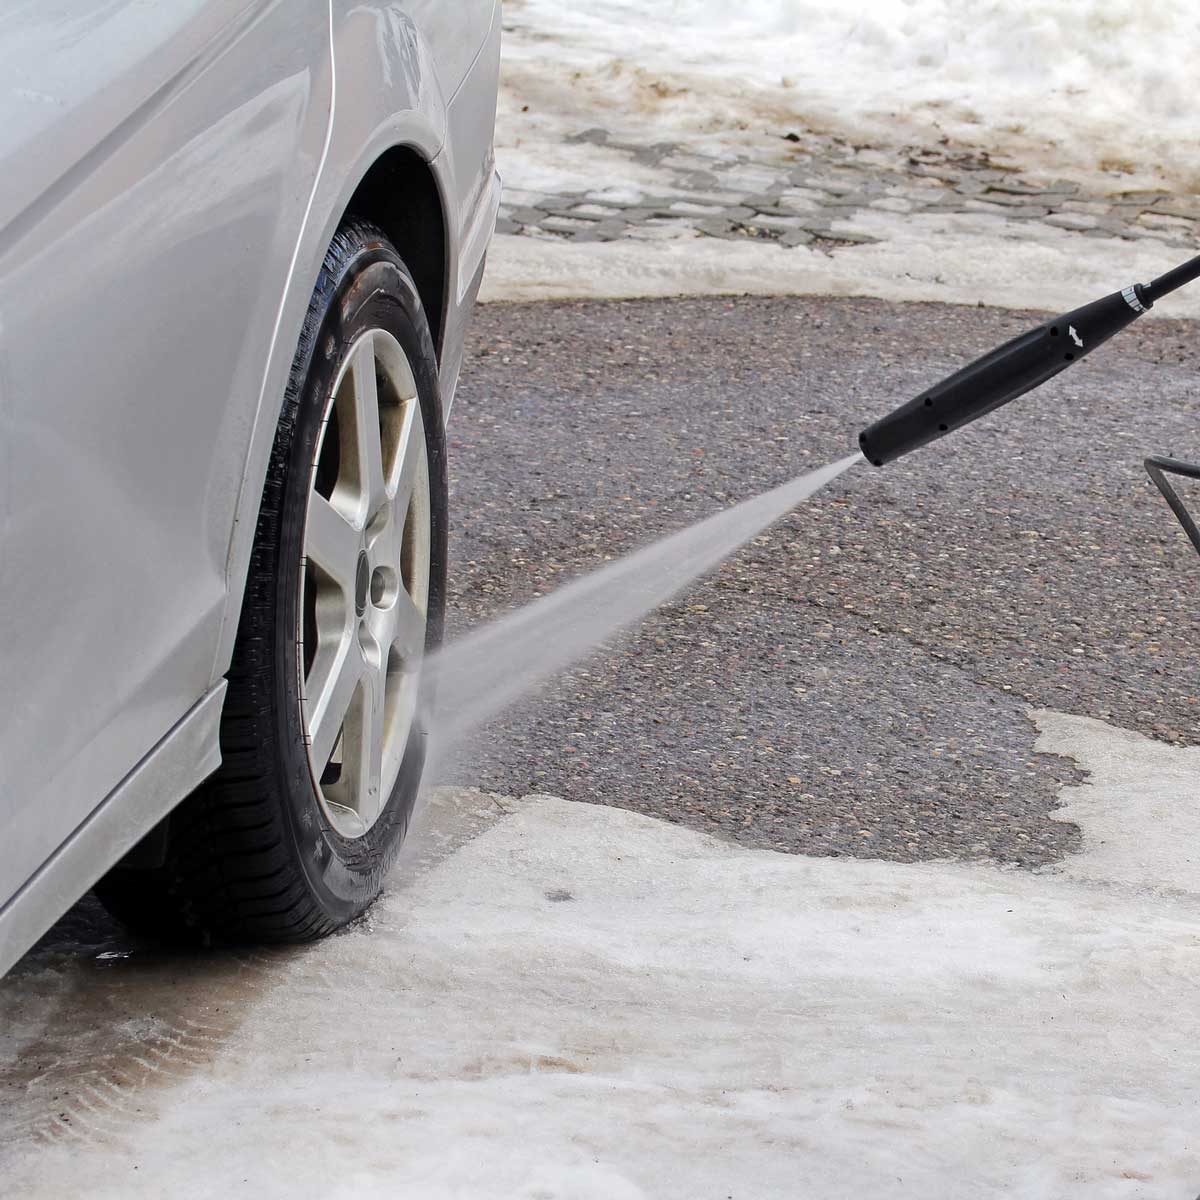 How to Wash Your Car at Home in Winter